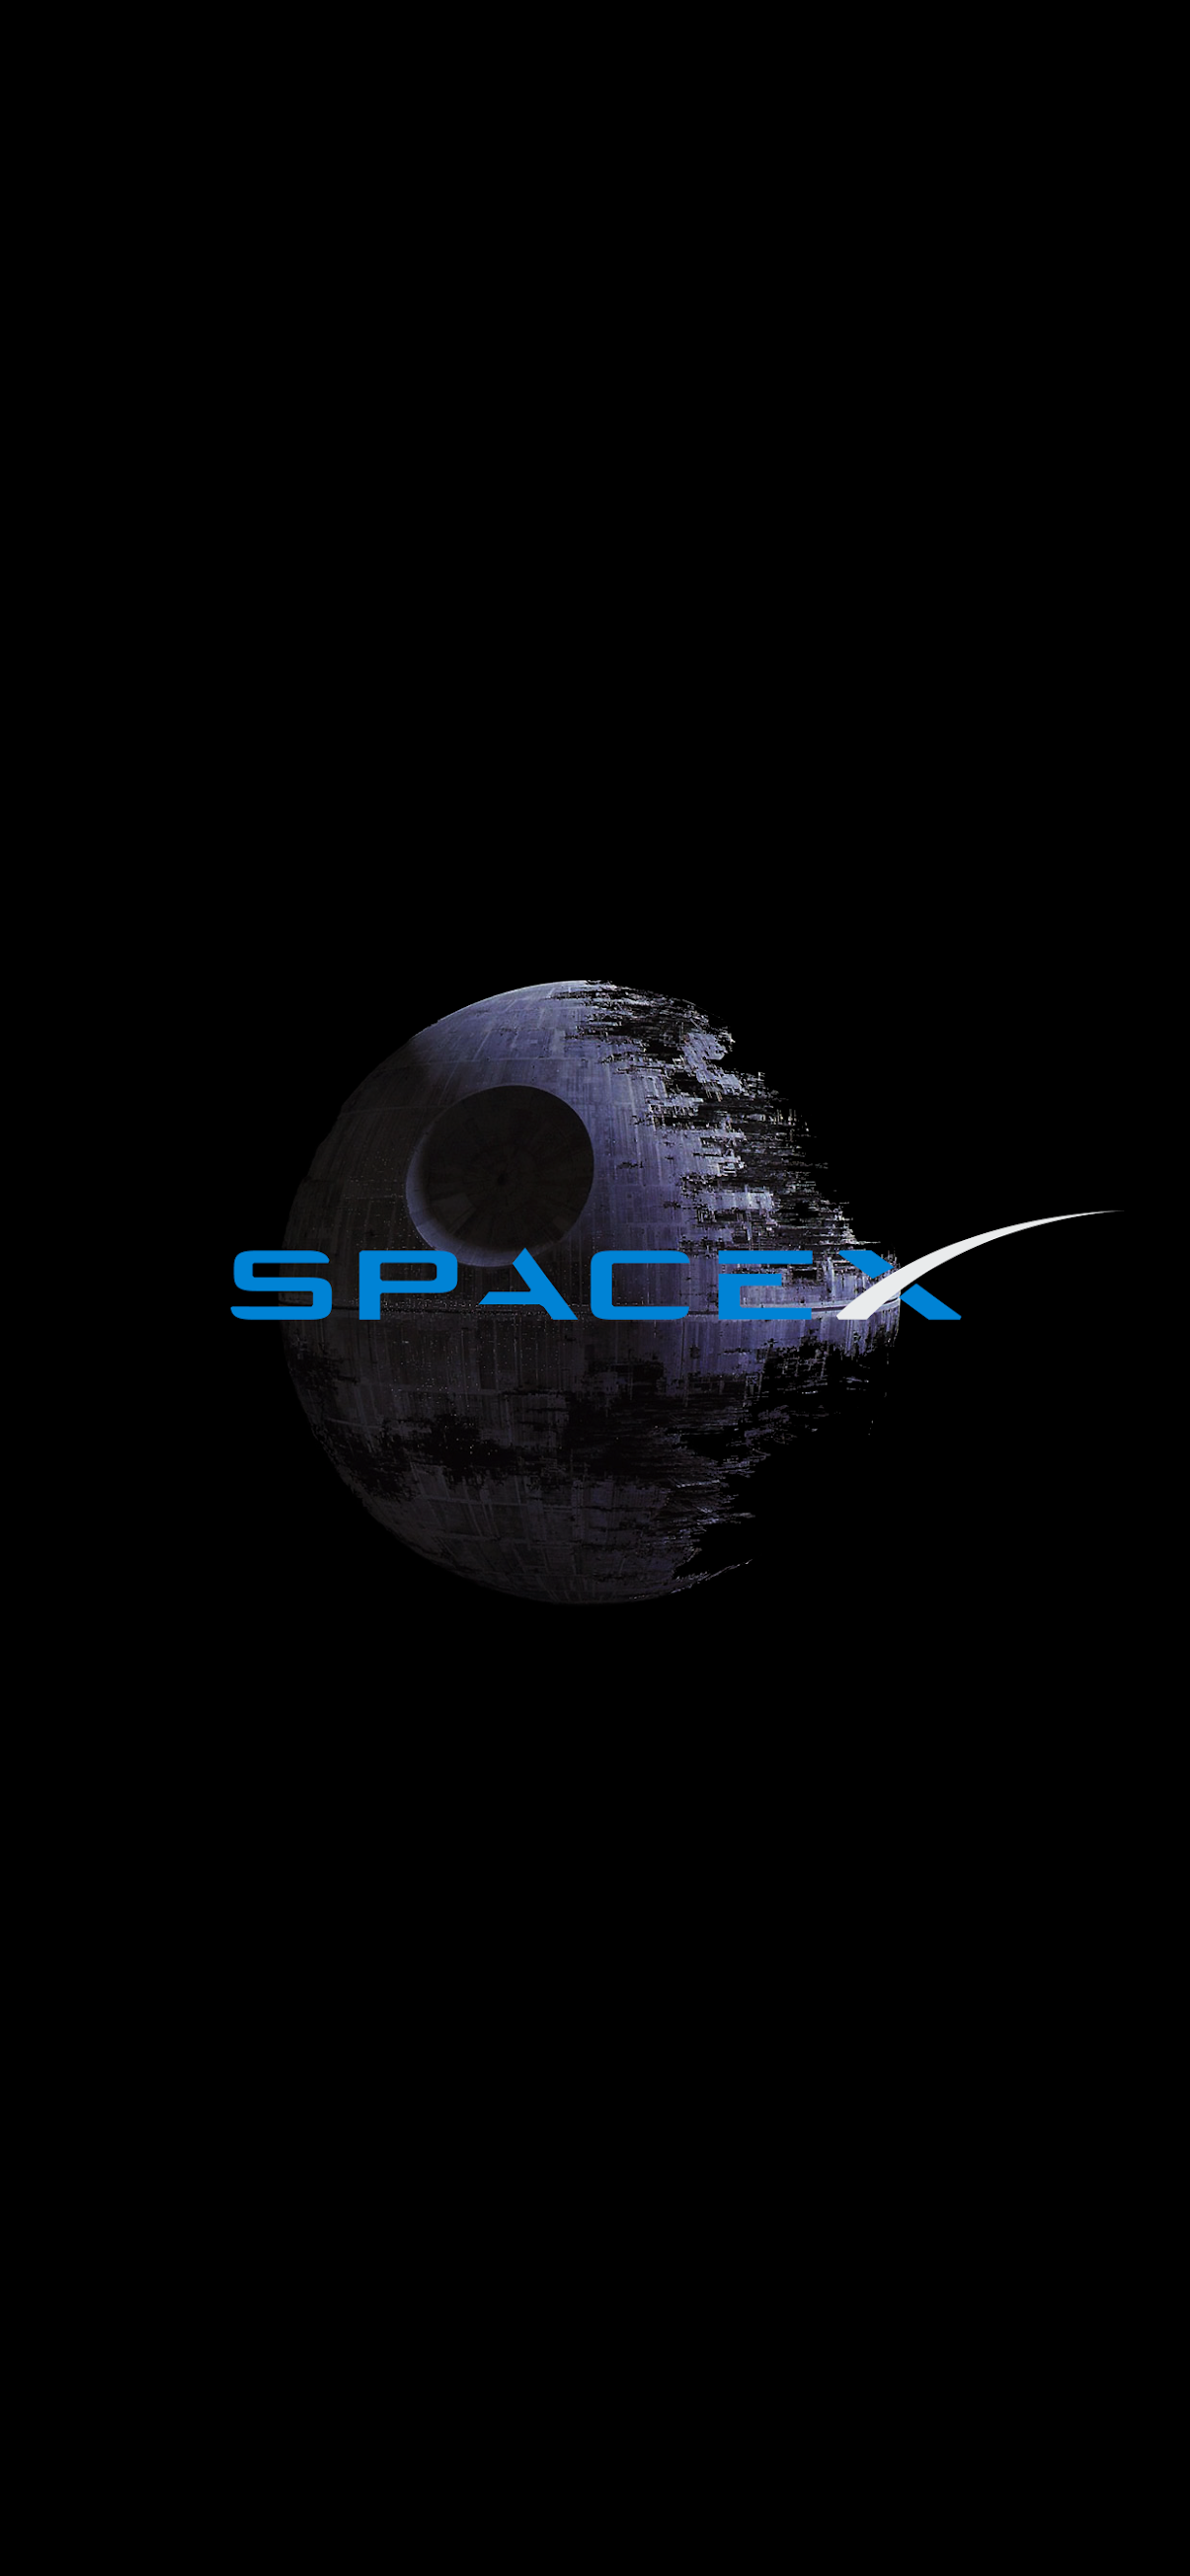 SPACEX DEATH STAR WALLPAPER AMOLED